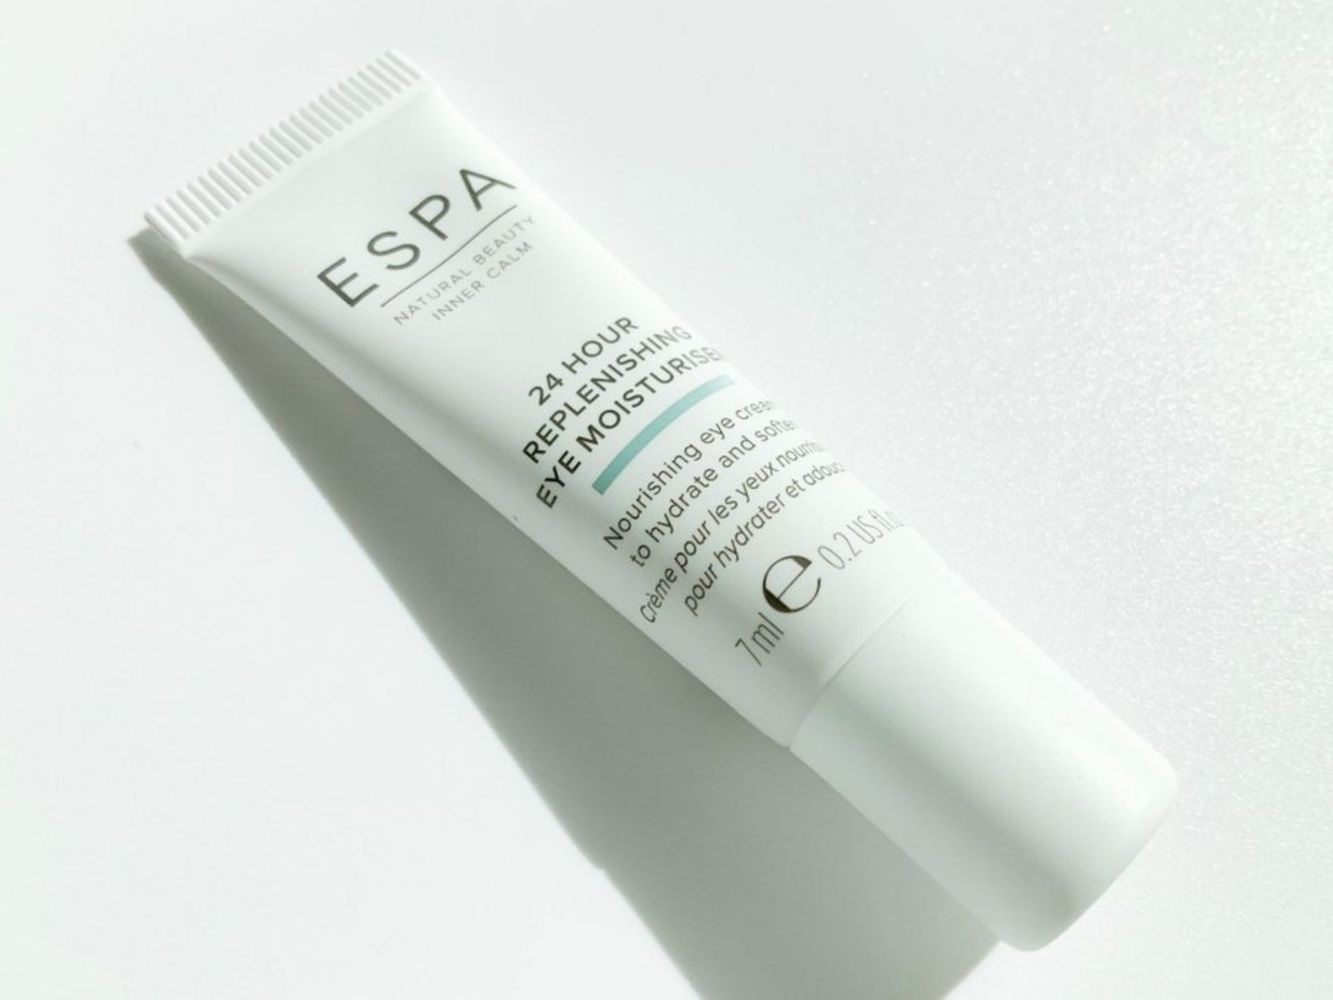 Liquidation SaleLiquidation Sale of Luxury High End Branded Skincare & Toiletries Products from Espa - Delivery Available